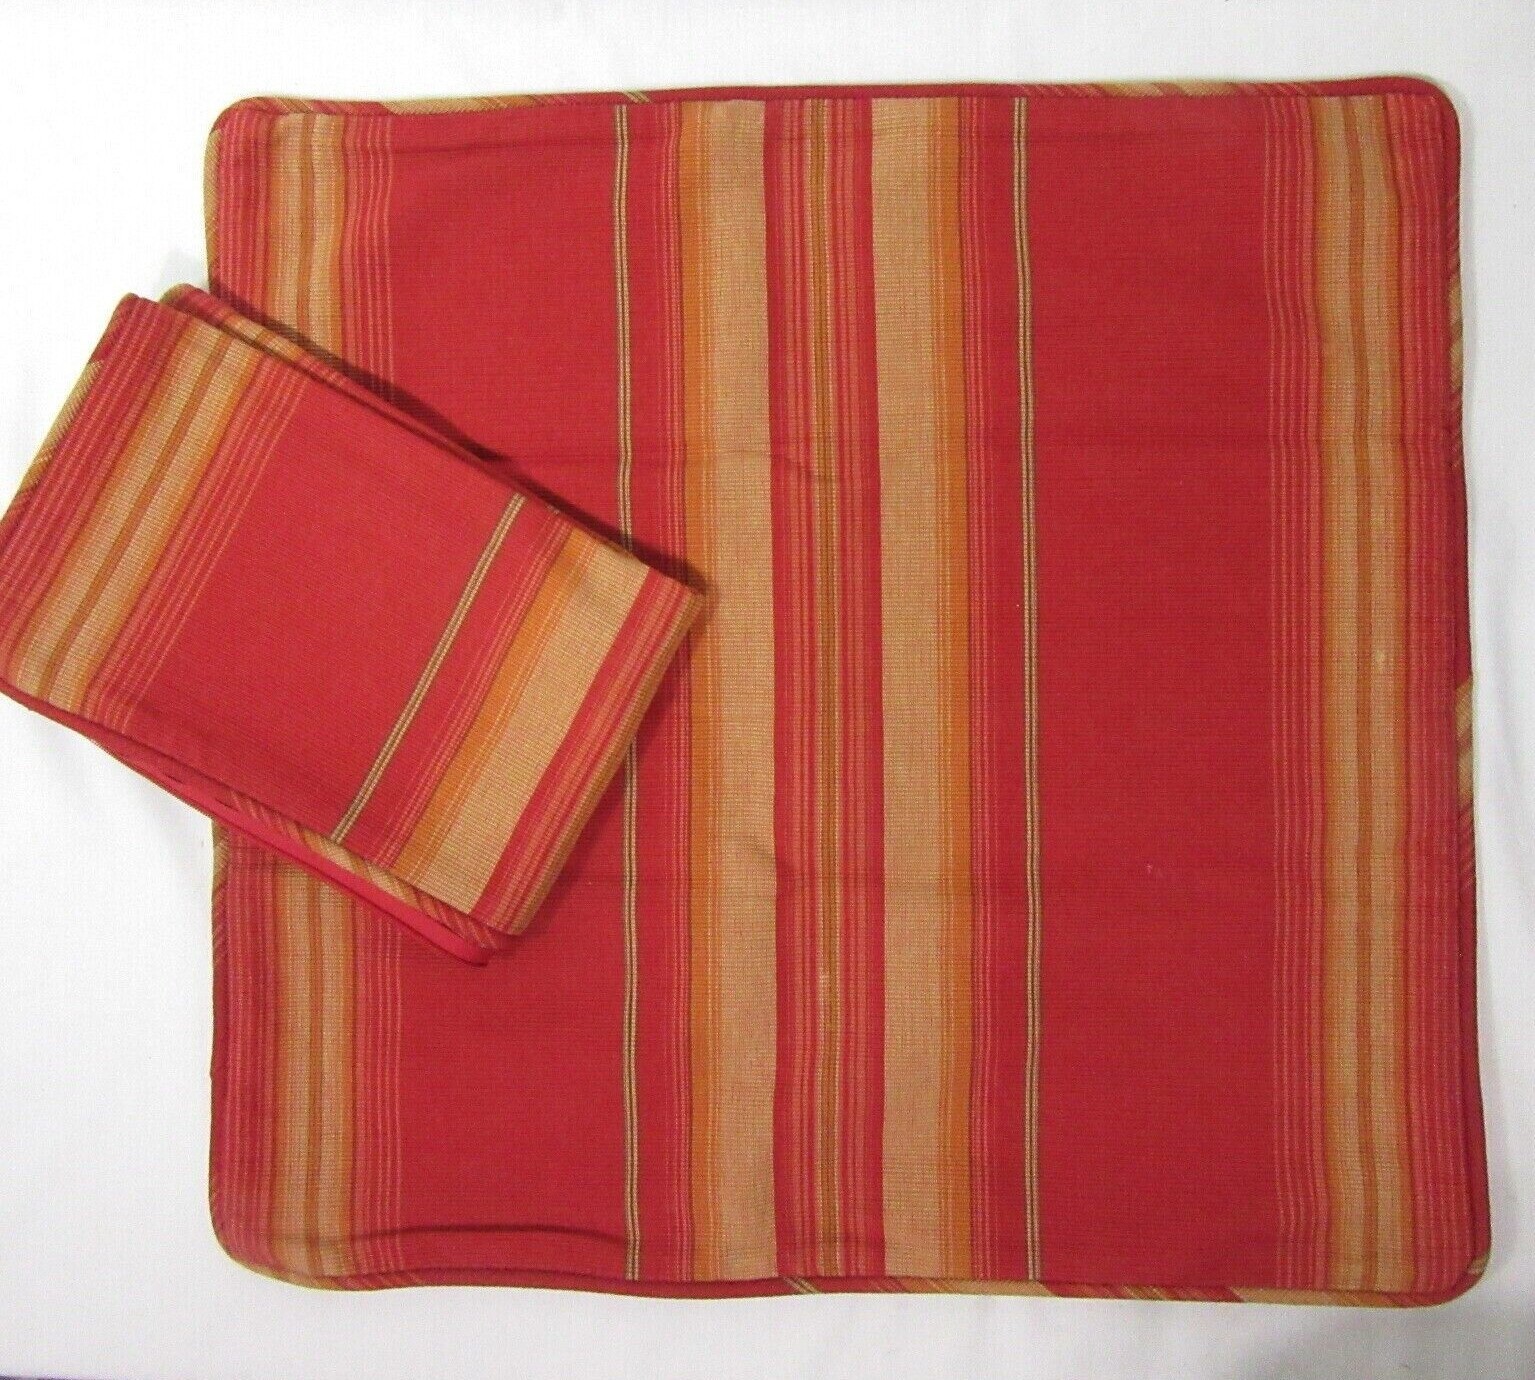 Primary image for Pottery Barn Harrison Stripe Red Multi 2-PC 20-inch Square Pillow Covers